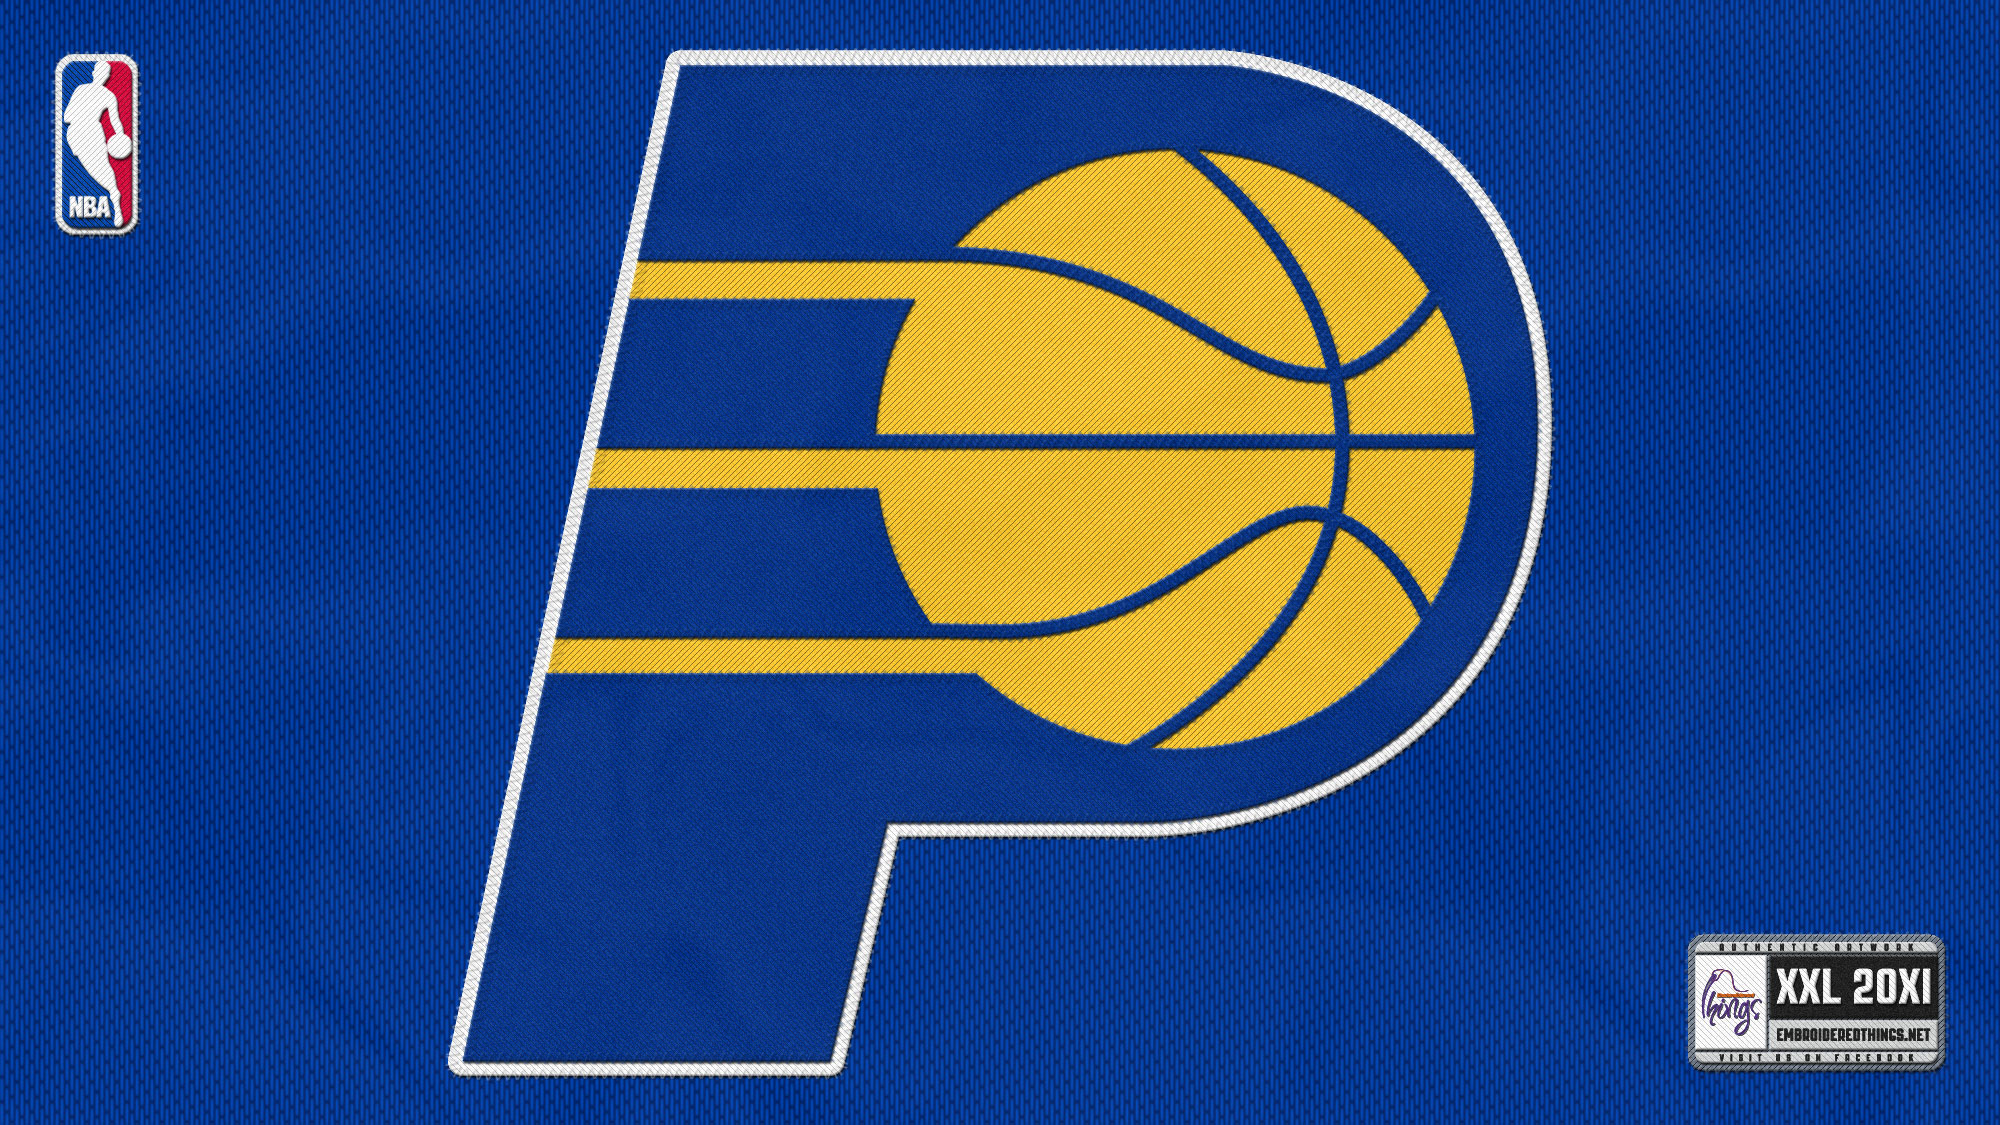 Logo Wallpaper Home Search Results For Indiana Pacers